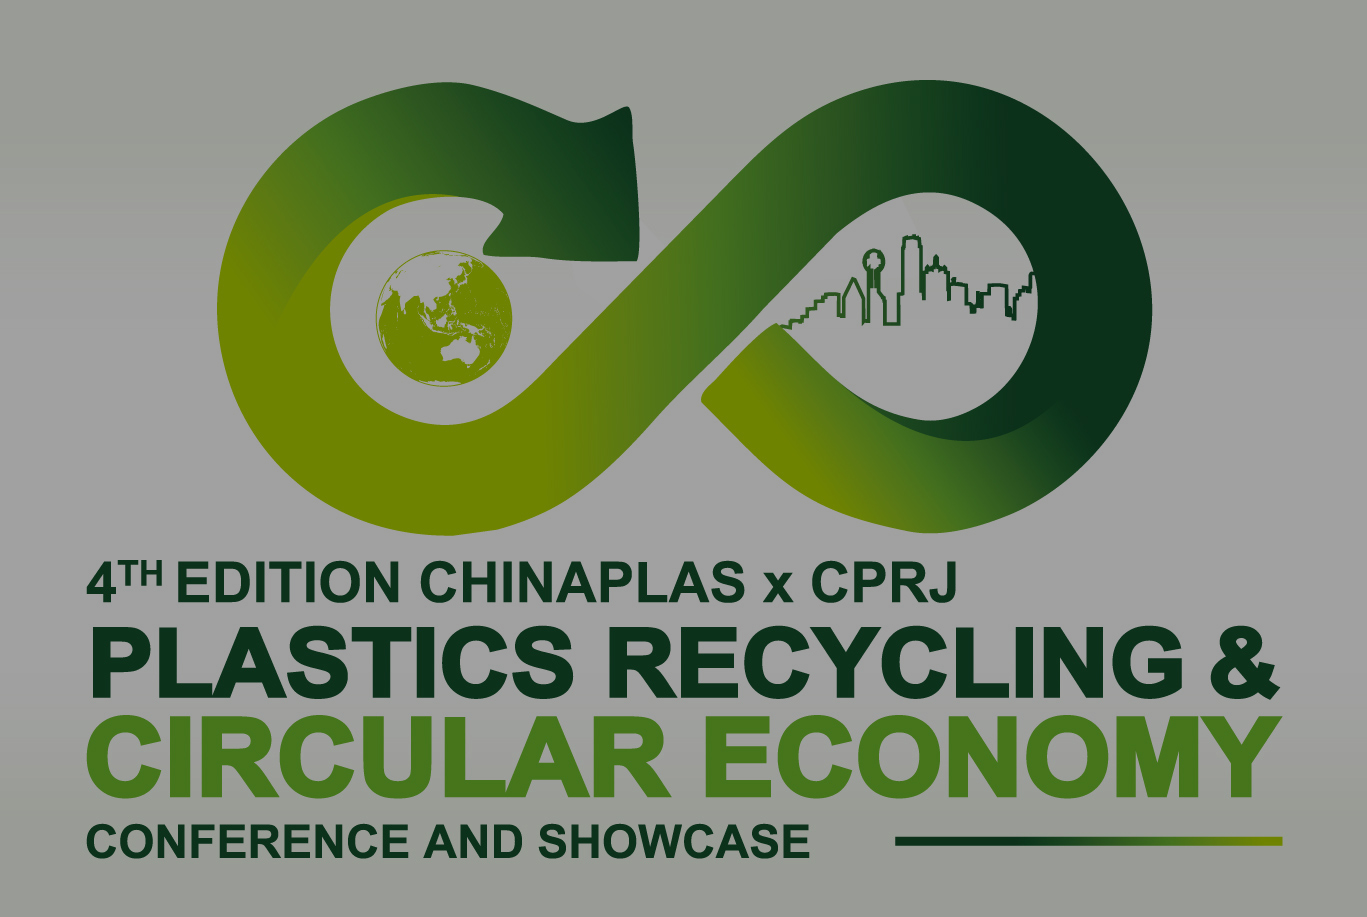 Plastics Recycling & Circular Economy Conference and Showcase 